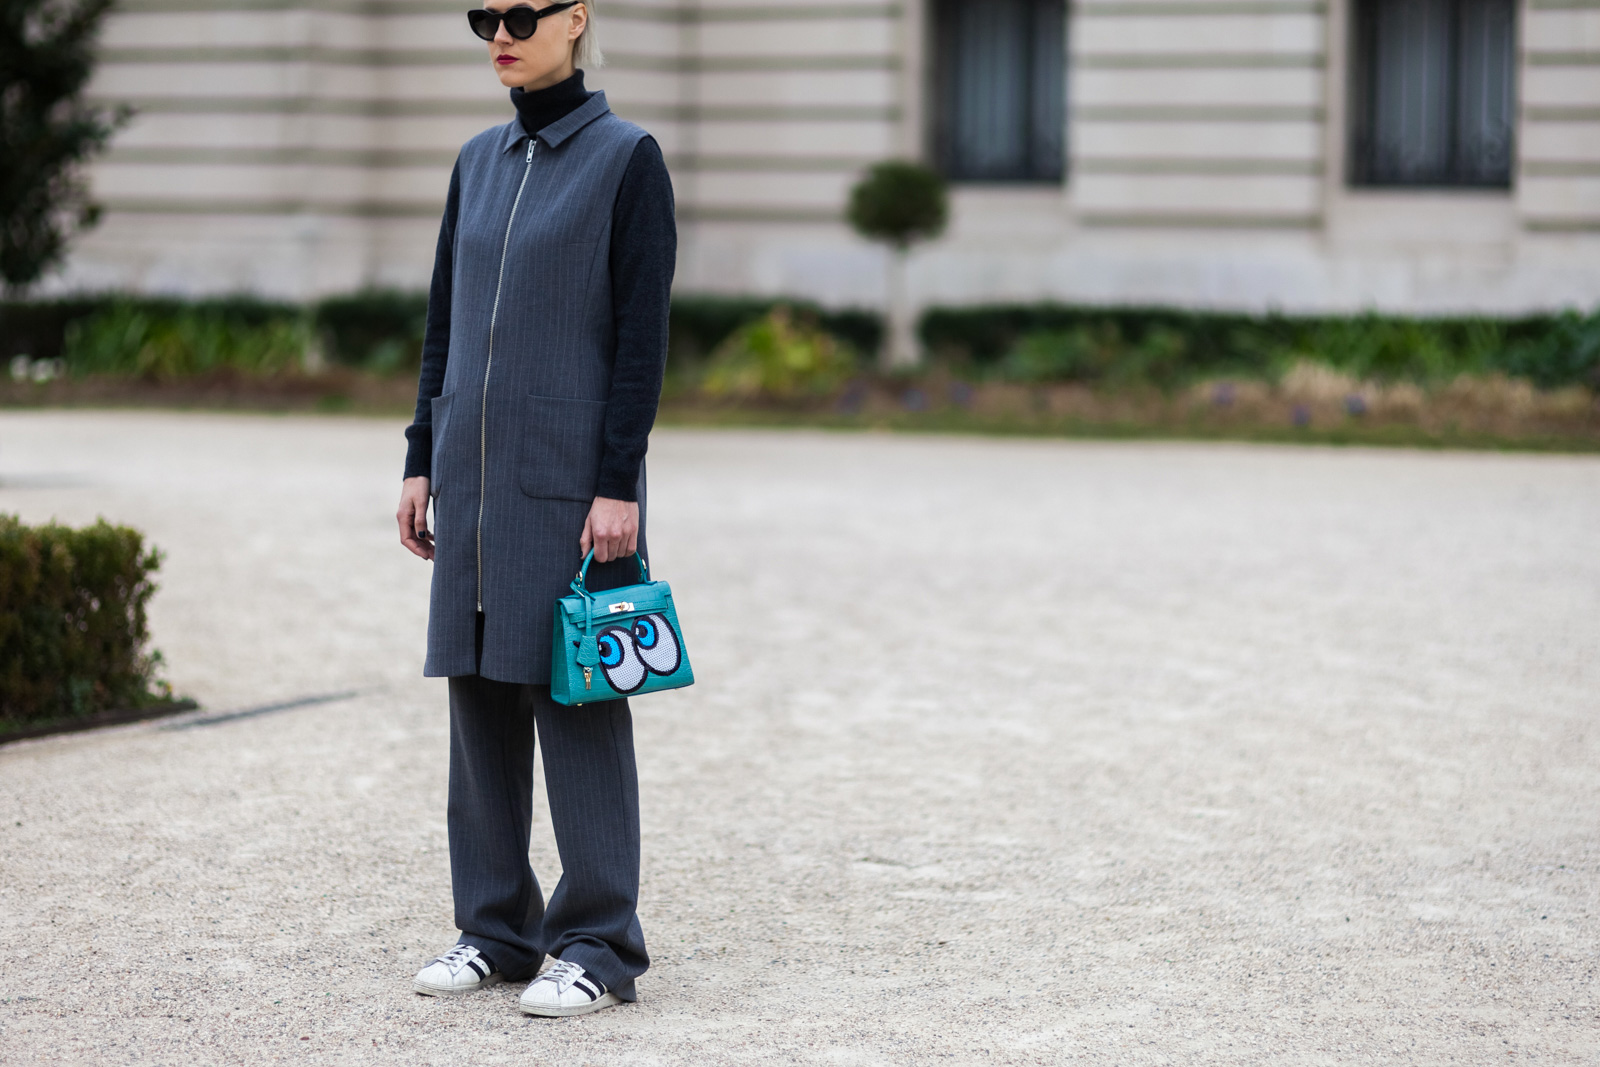 Linda Tol wearing a Ganni suit, Play no More bag and Adidas superstar sneakers before the Chanel Fall/Winter 2015-2016 fashion show at the Grand Palais in Paris, France